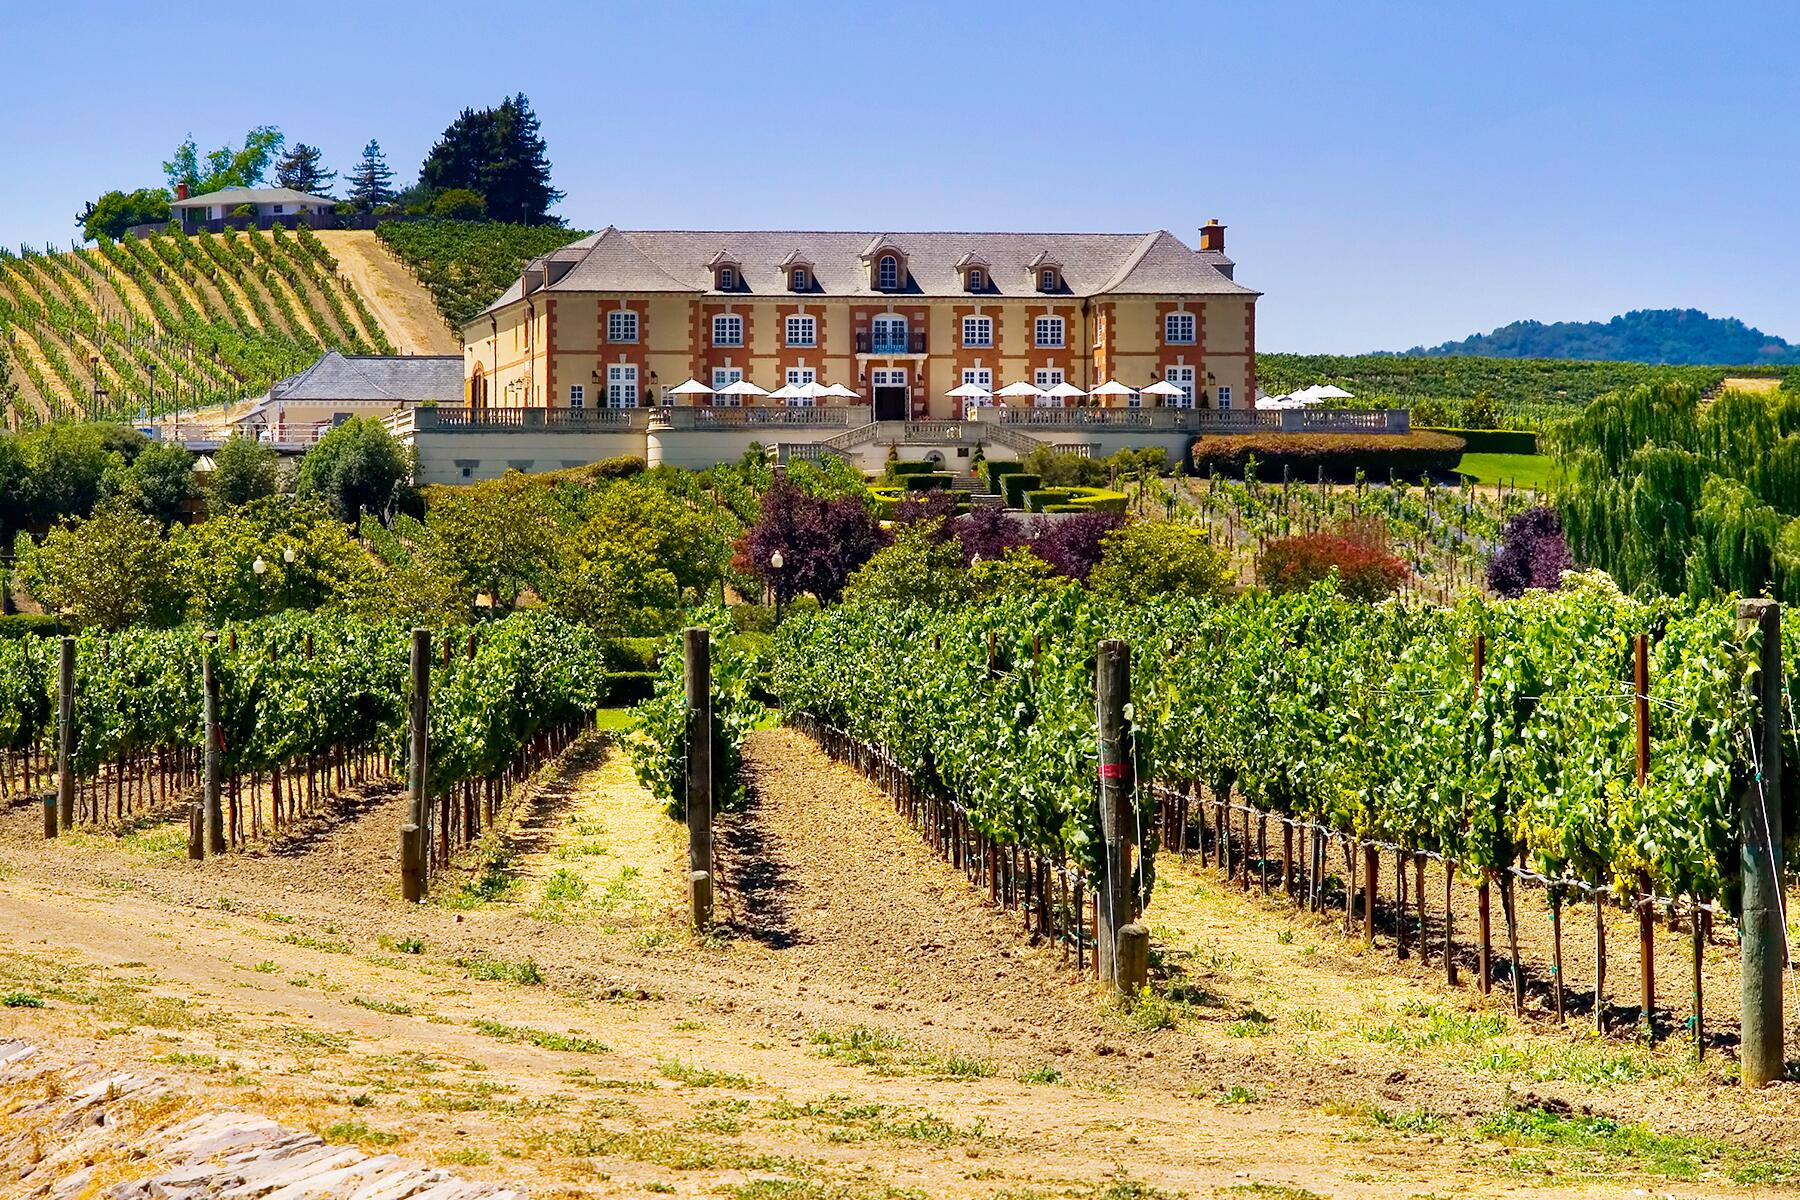 The Perfect 3-Day Weekend Road Trip Itinerary to Napa Valley